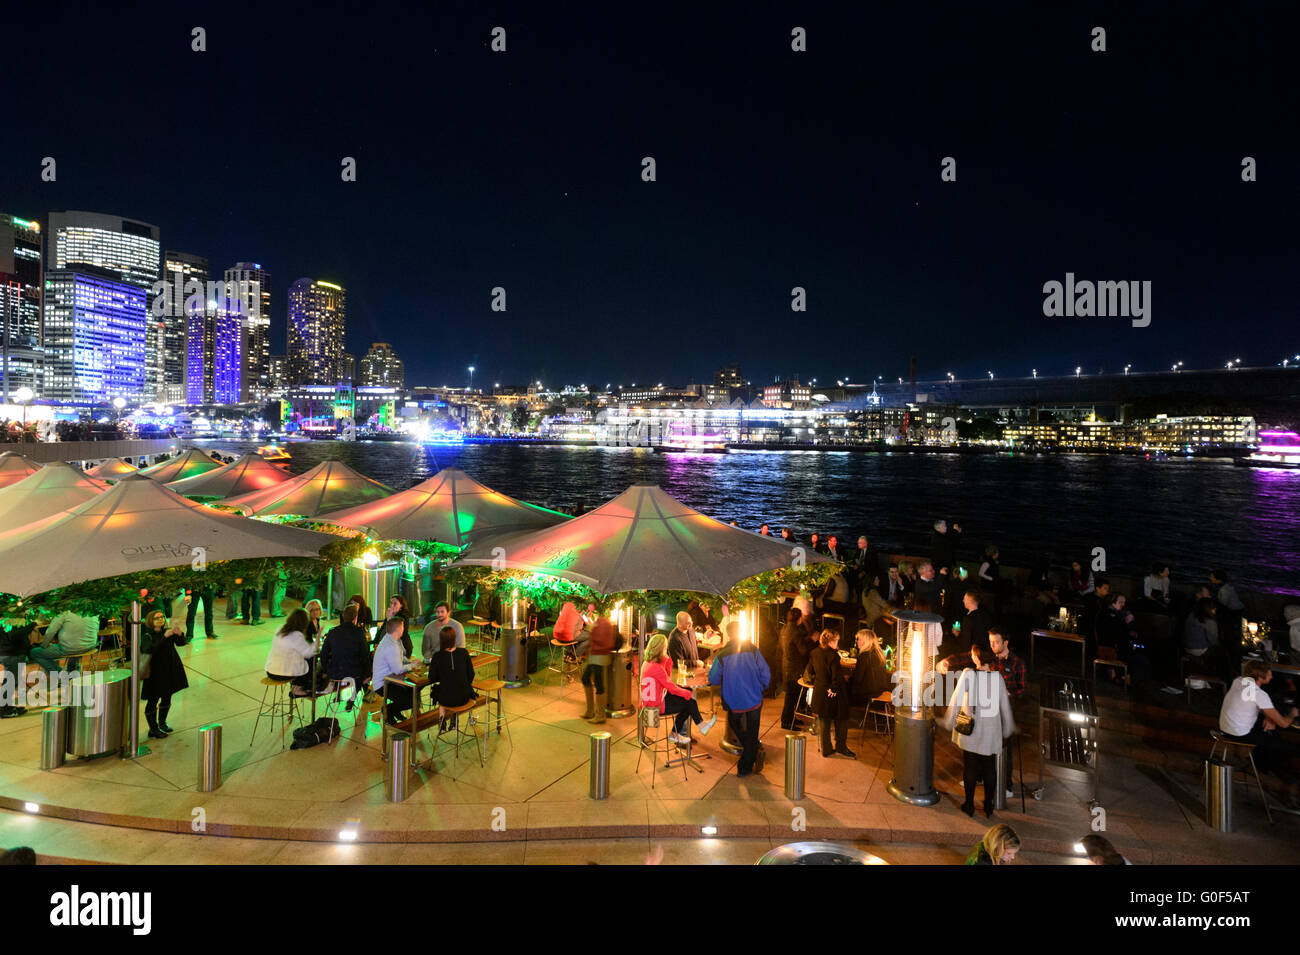 Outdoor Bars and Restaurant during Vivid Festival, Circular Quay, Sydney Harbour, New South Wales, Australia Stock Photo